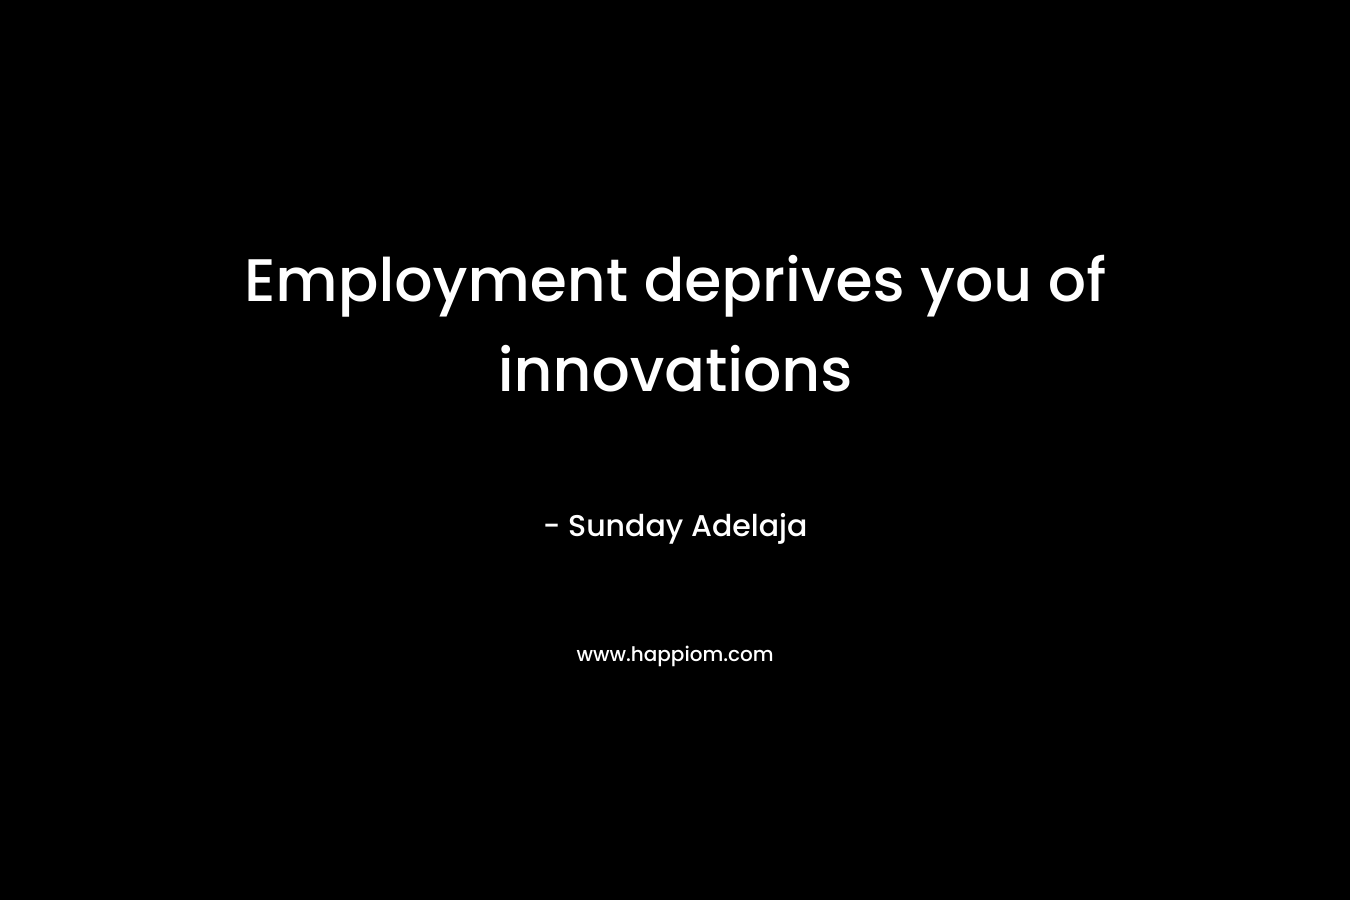 Employment deprives you of innovations